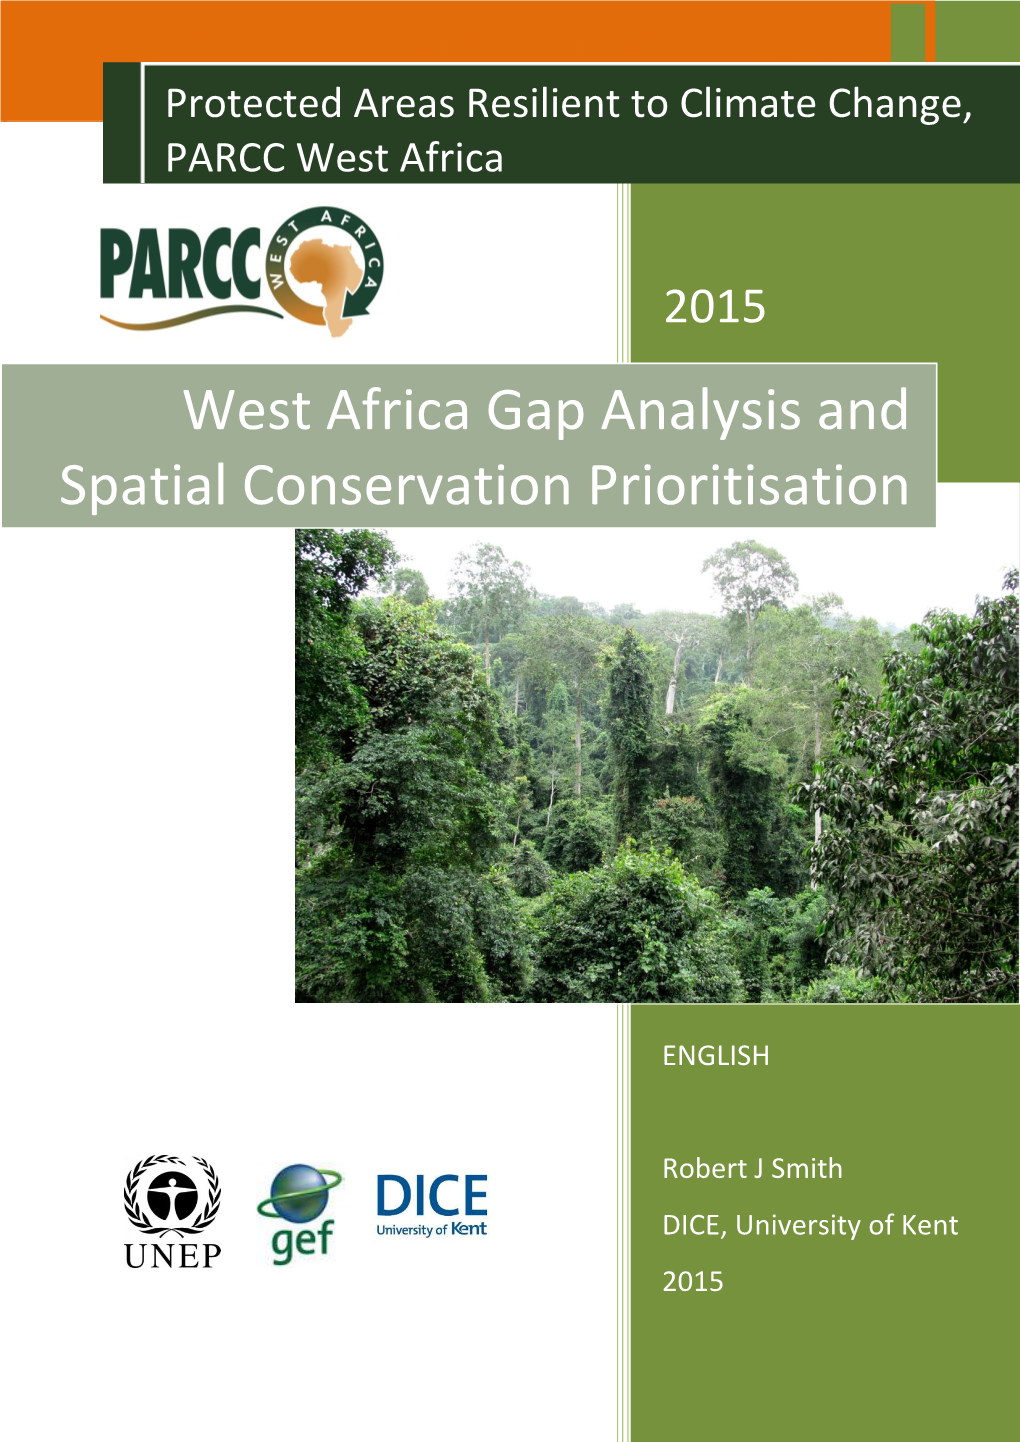 Smith R.J. 2015. West Africa Gap Analysis and Spatial Conservation